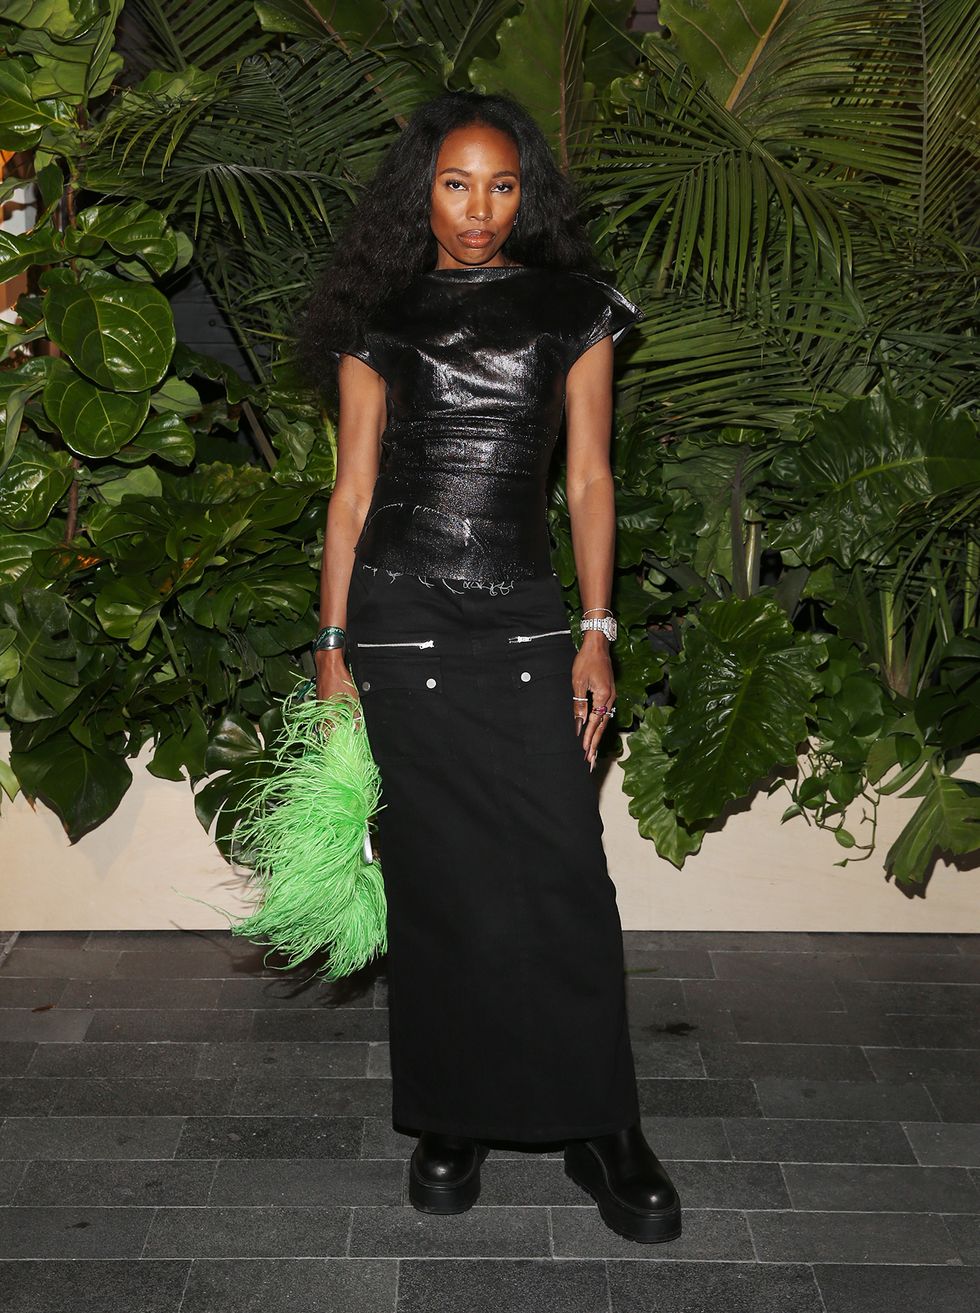 miami beach, florida december 01 zerina akers attends w magazine and burberry’s art basel celebration on december 01, 2022 in miami beach, florida photo by rob kimgetty images for w magazine